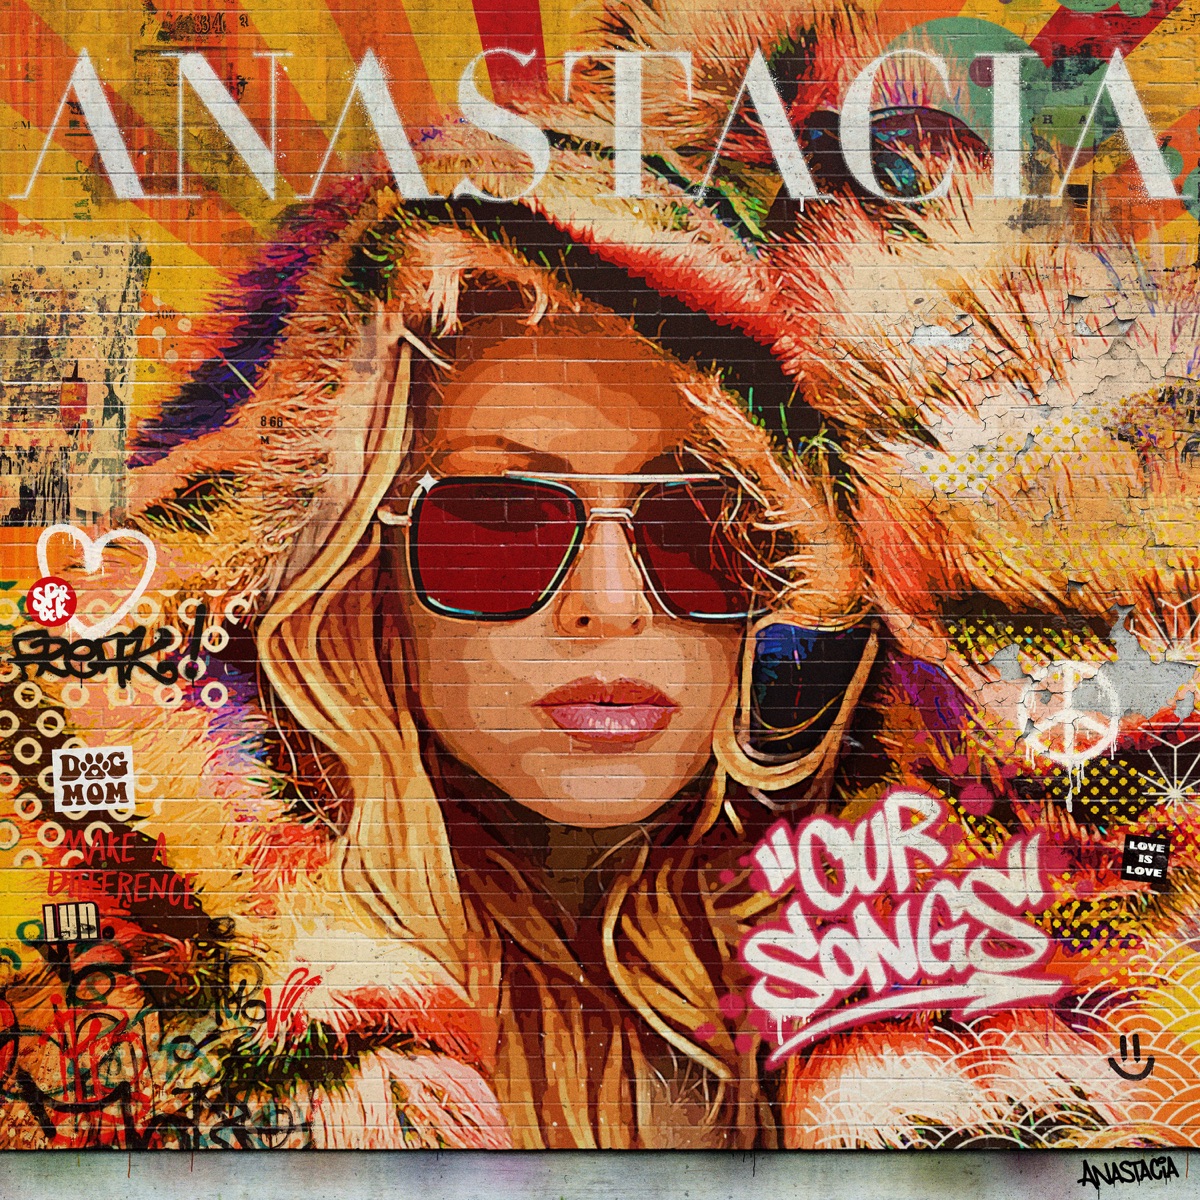 MP3: Anastacia – Forever Young